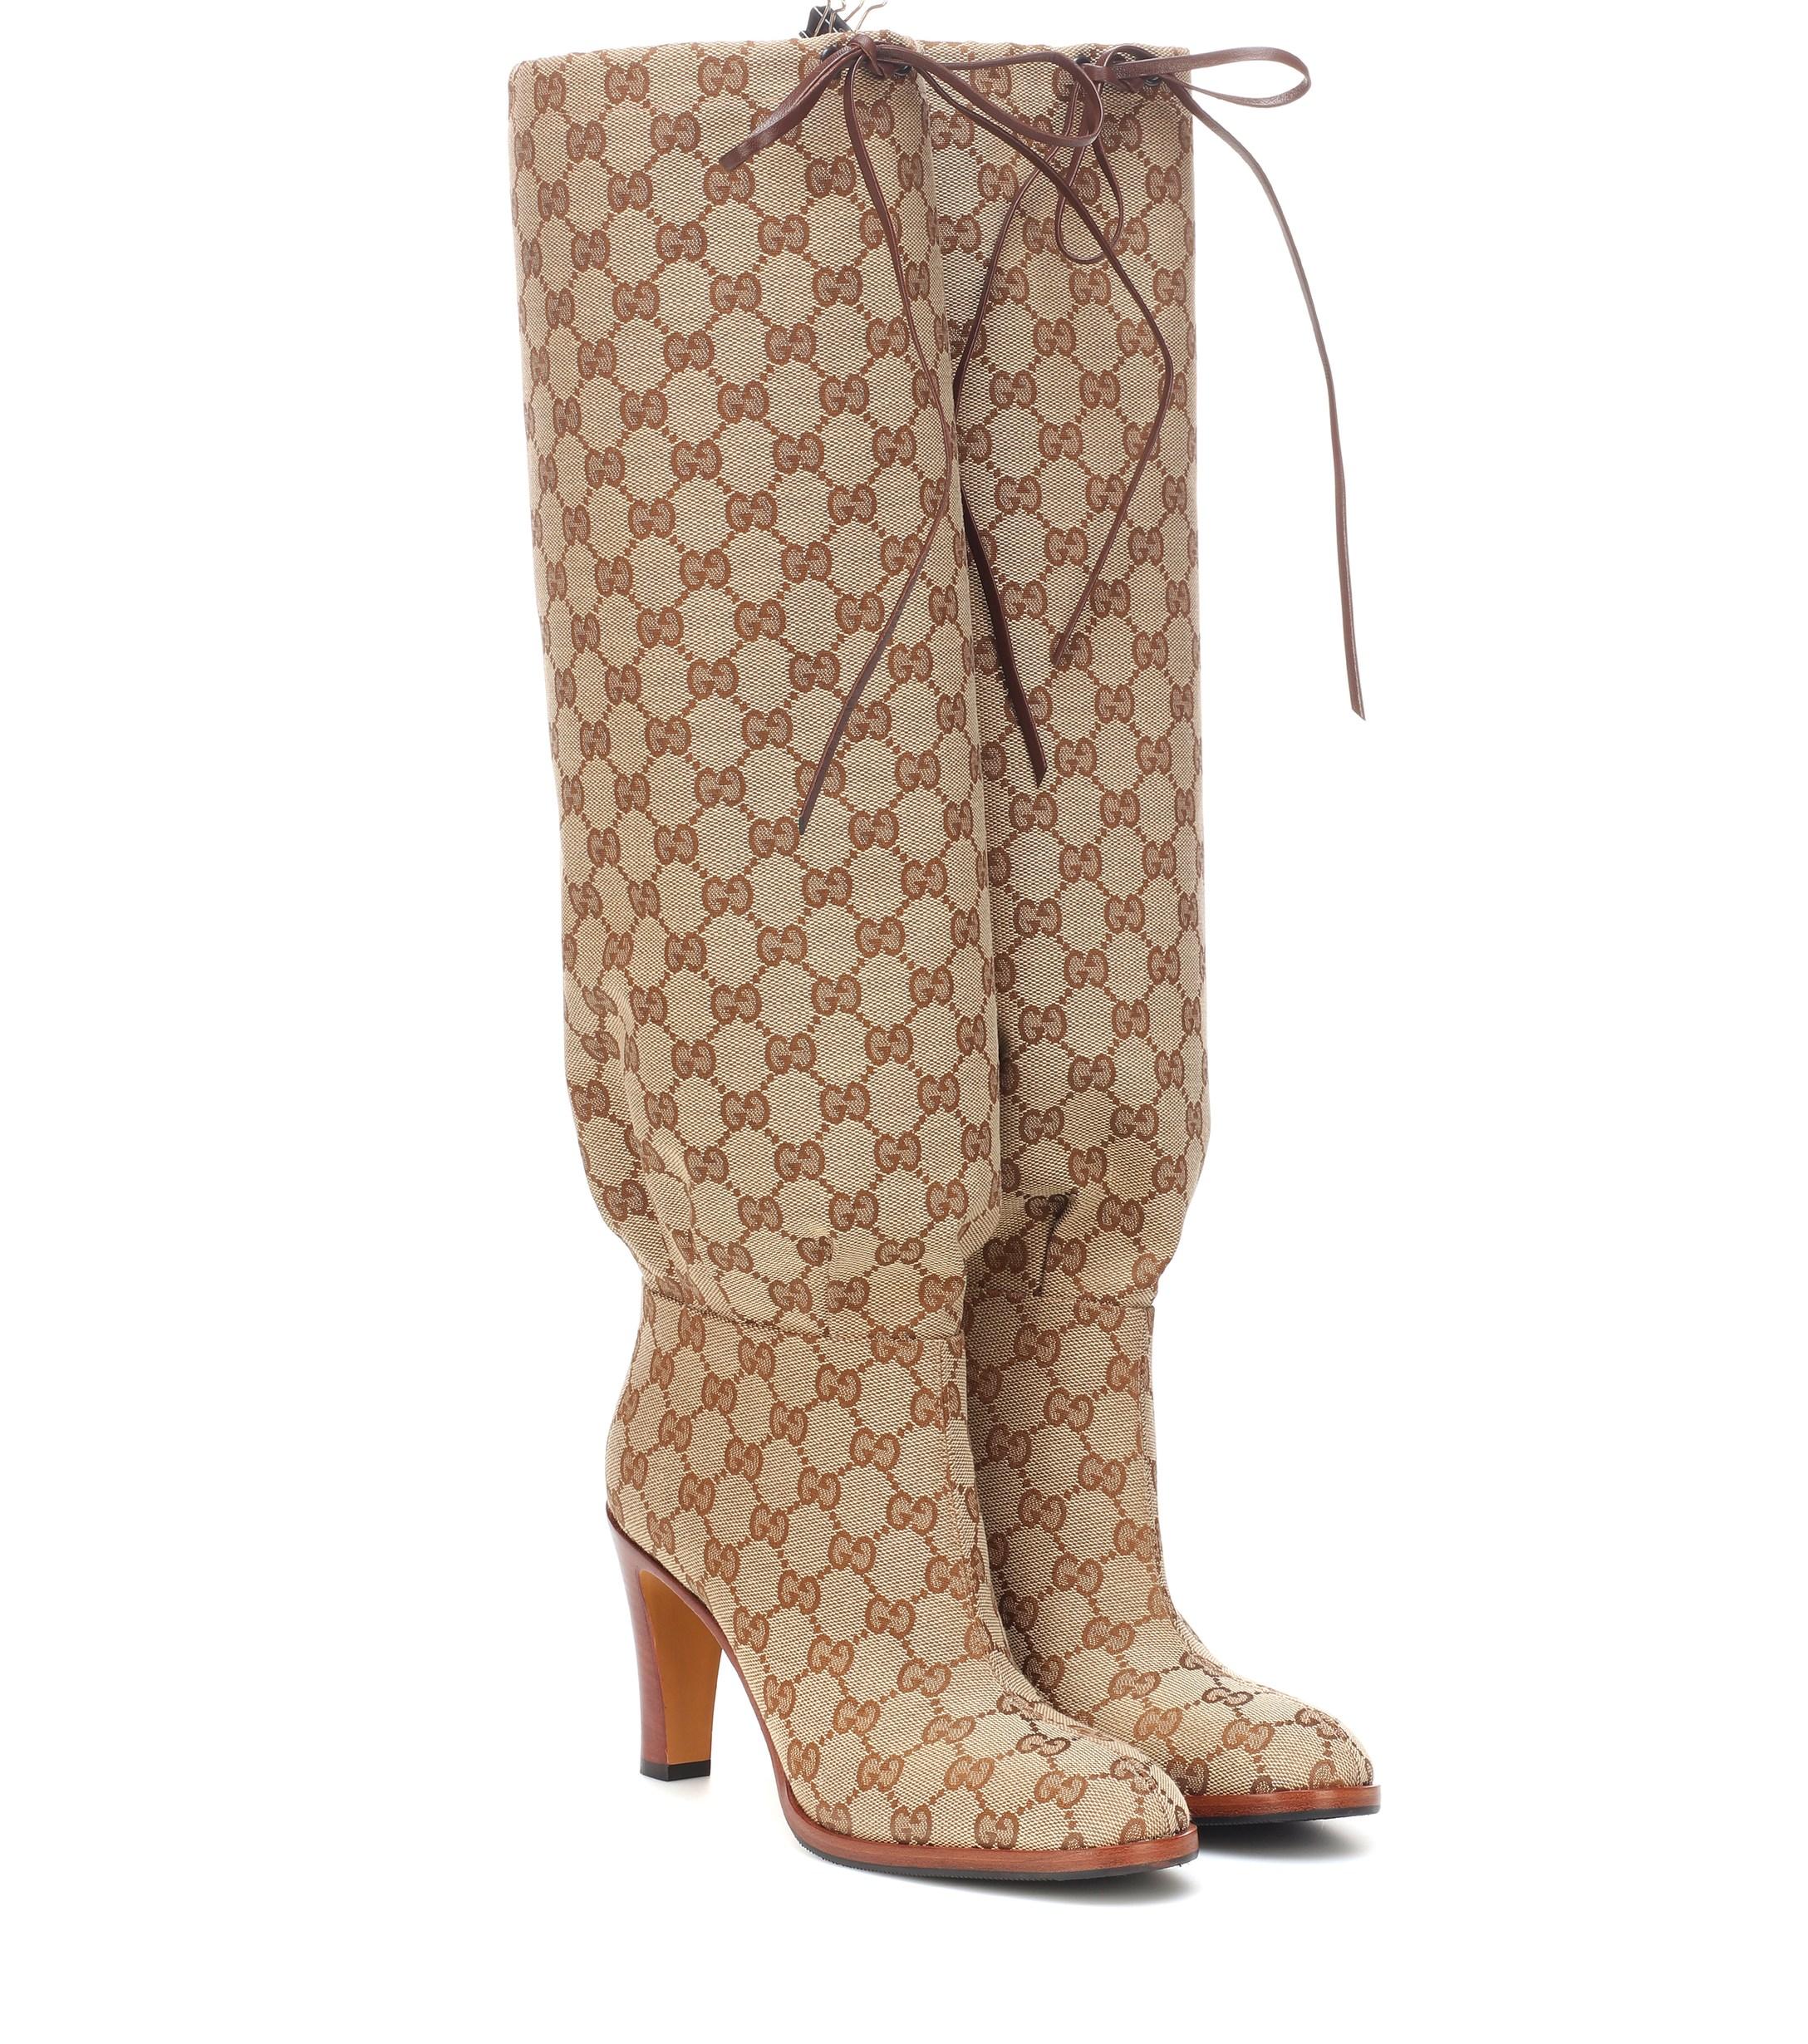 Lyst - Gucci GG Canvas Knee-high Boots